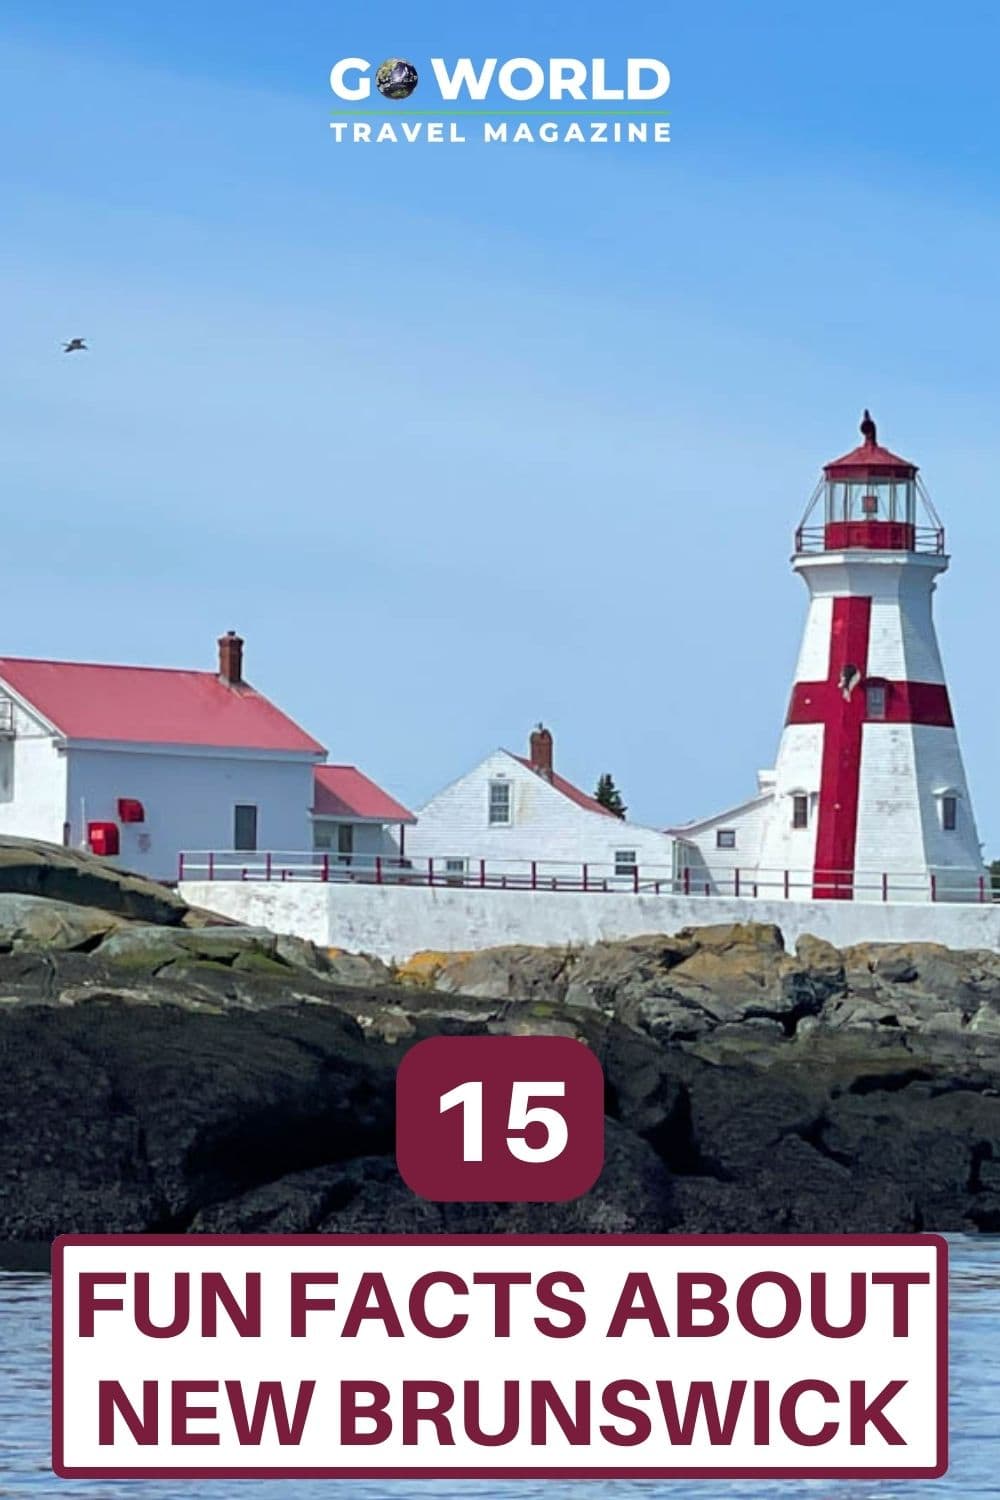 Fun facts about New Brunswick, Canada that will make you want to visit. Teaser: The local Acadian culture shares roots with the Cajuns. #Newbrunswick #Maritimescanada